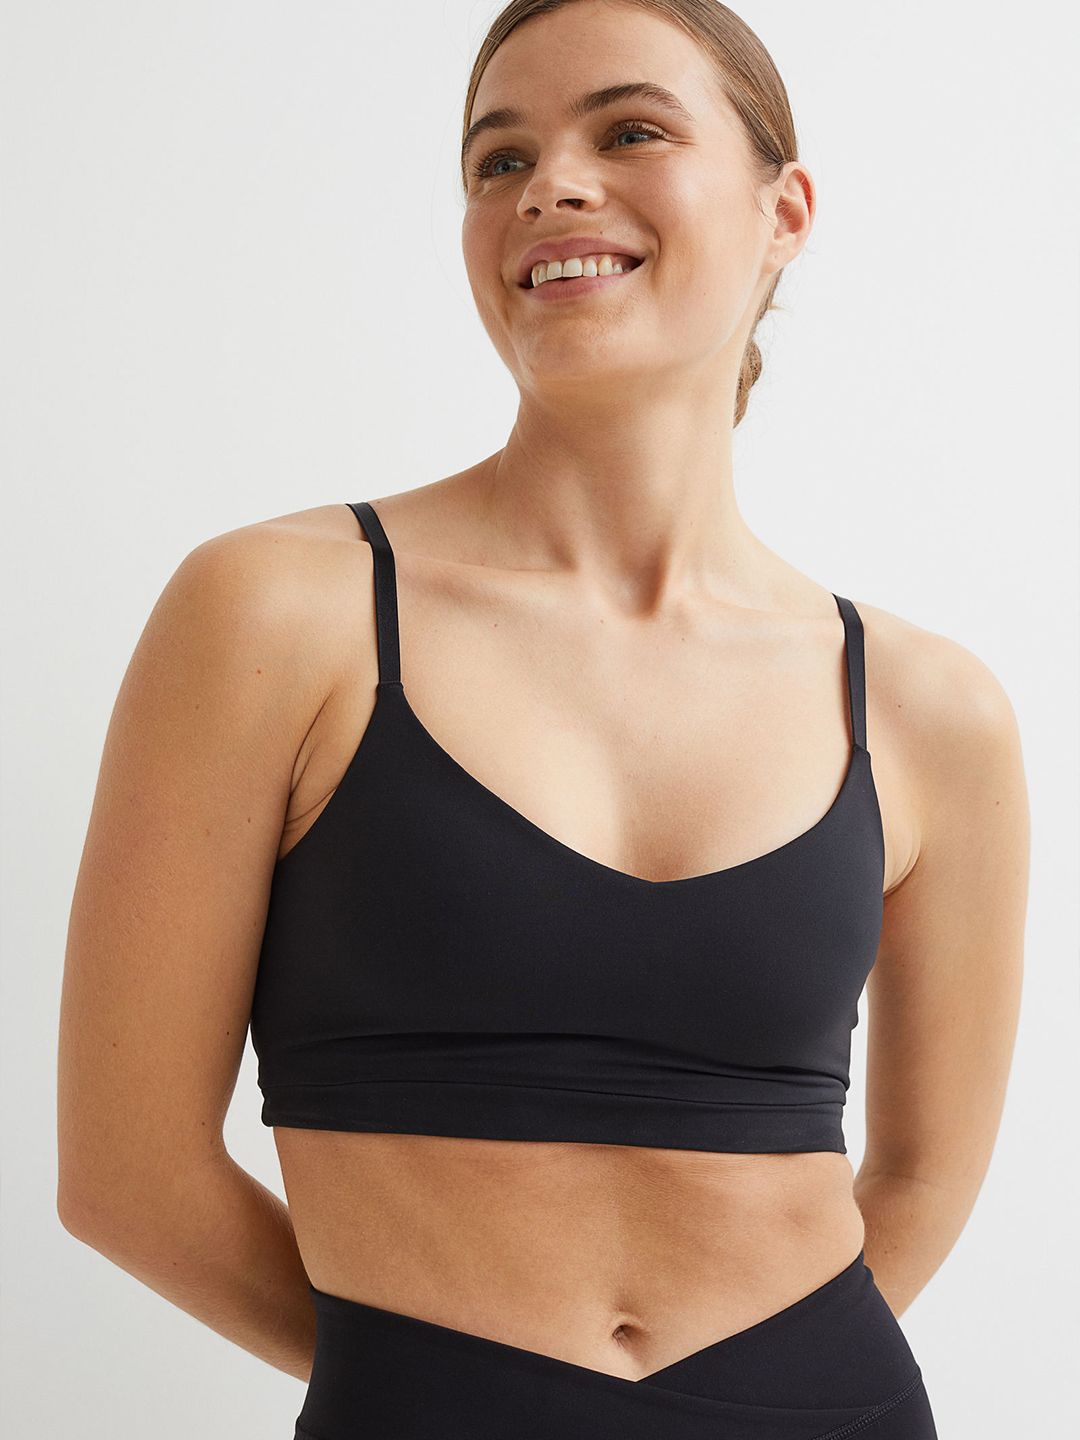 H&M Women Black Solid Light Support Sports Bra Price in India